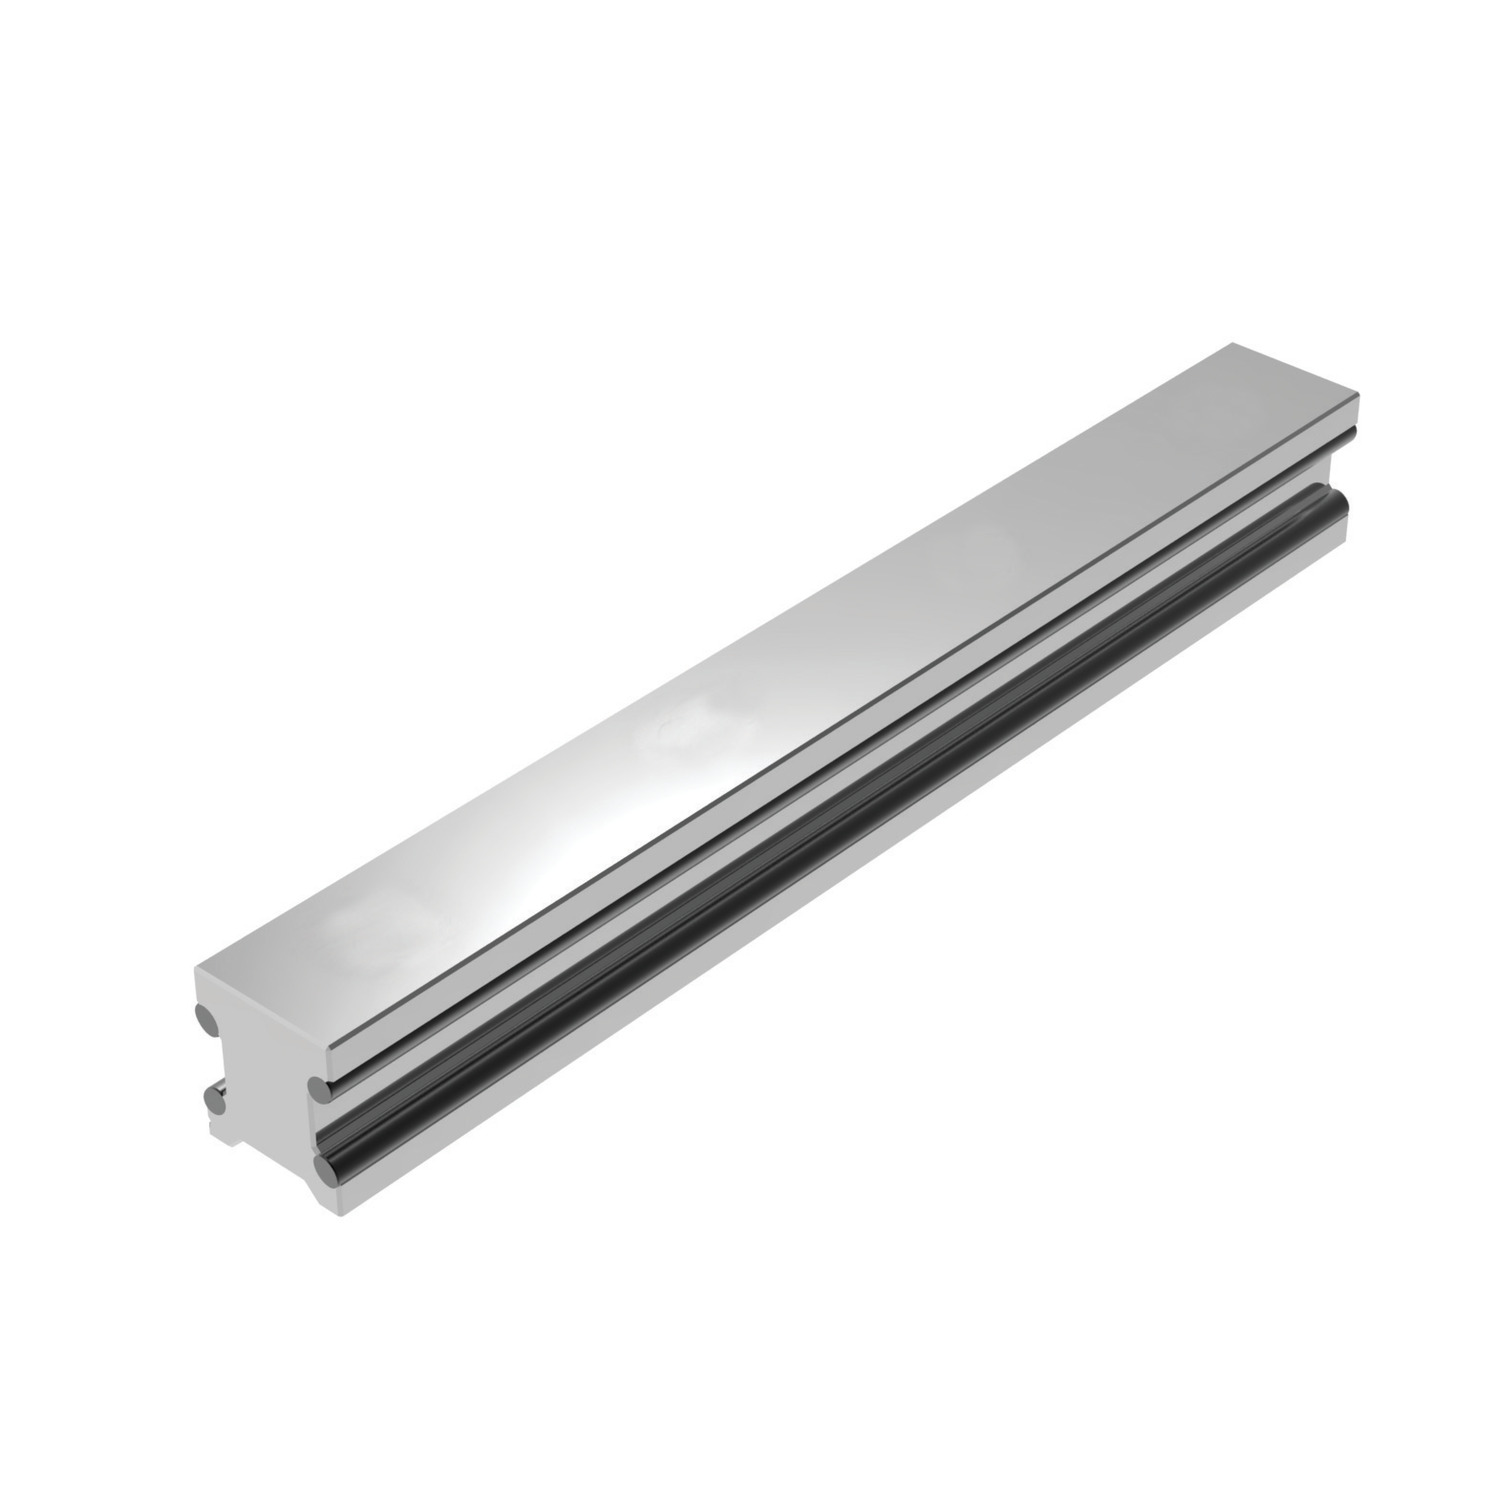 Aluminium Guideways Aluminium rear fixing linear rail 15mm, 20 and 25mm. Lightweight rails that ensure performance at up to 60% reduced weight compared to steel versions.